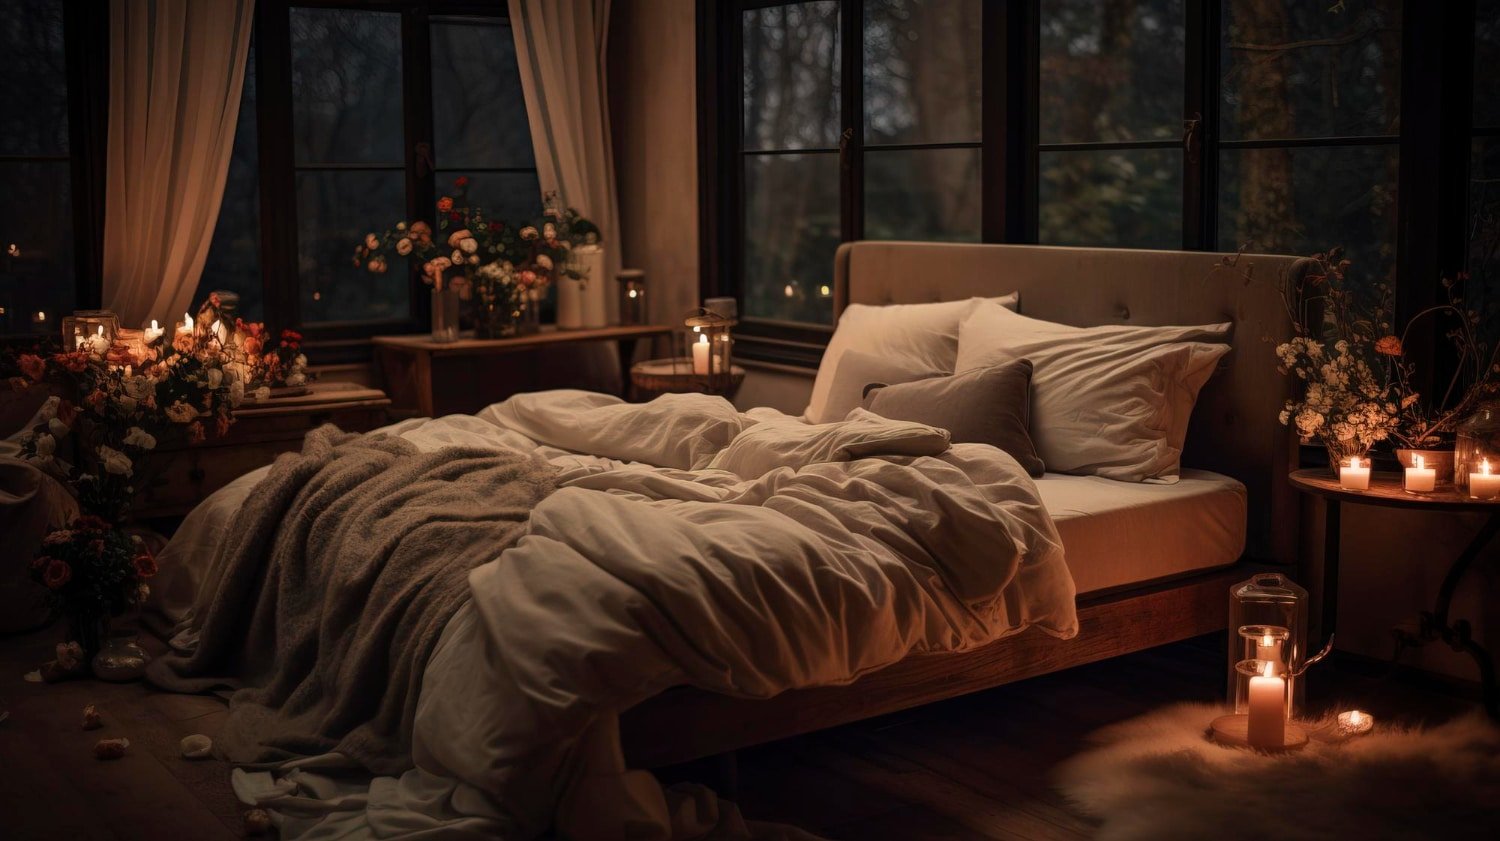 Sijo: Luxurious Bedding for a Restful Night’s Sleep